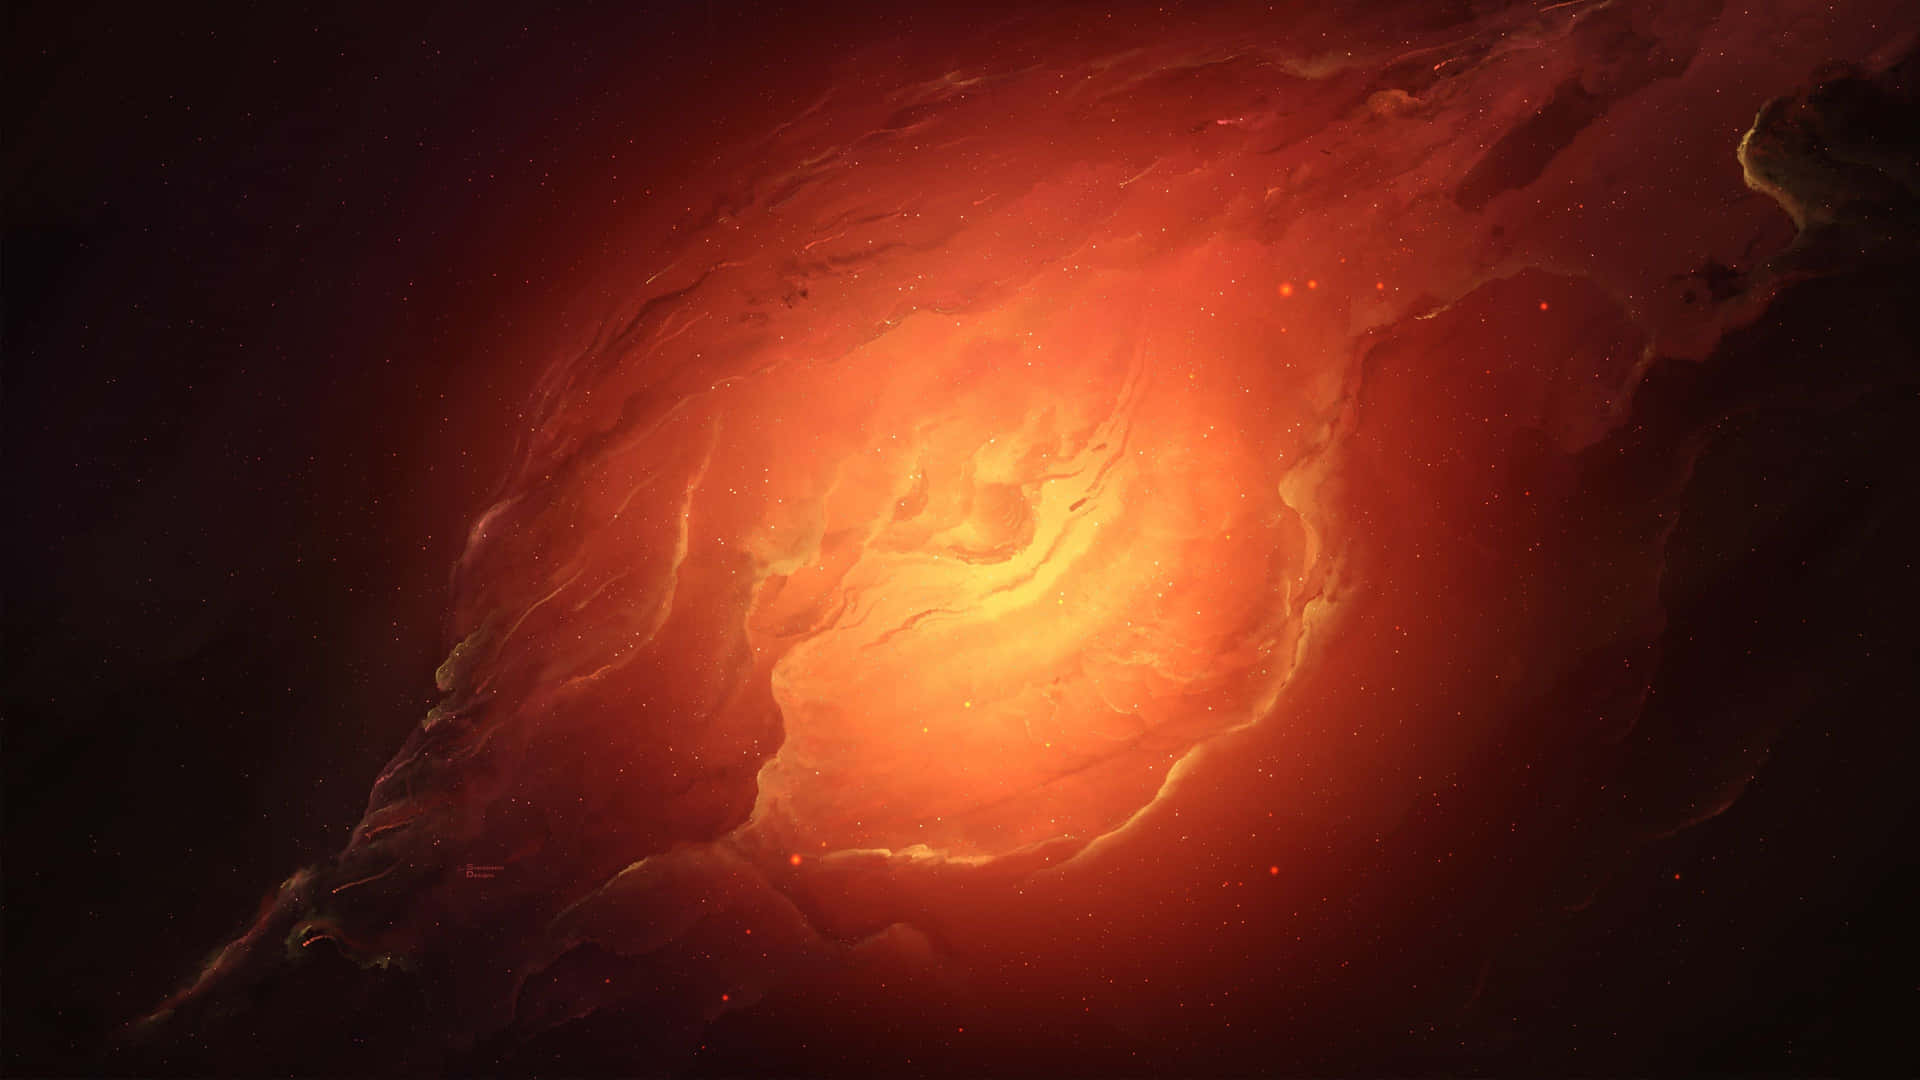 Witness the majesty and mystery of space in Cosmic 4K. Wallpaper